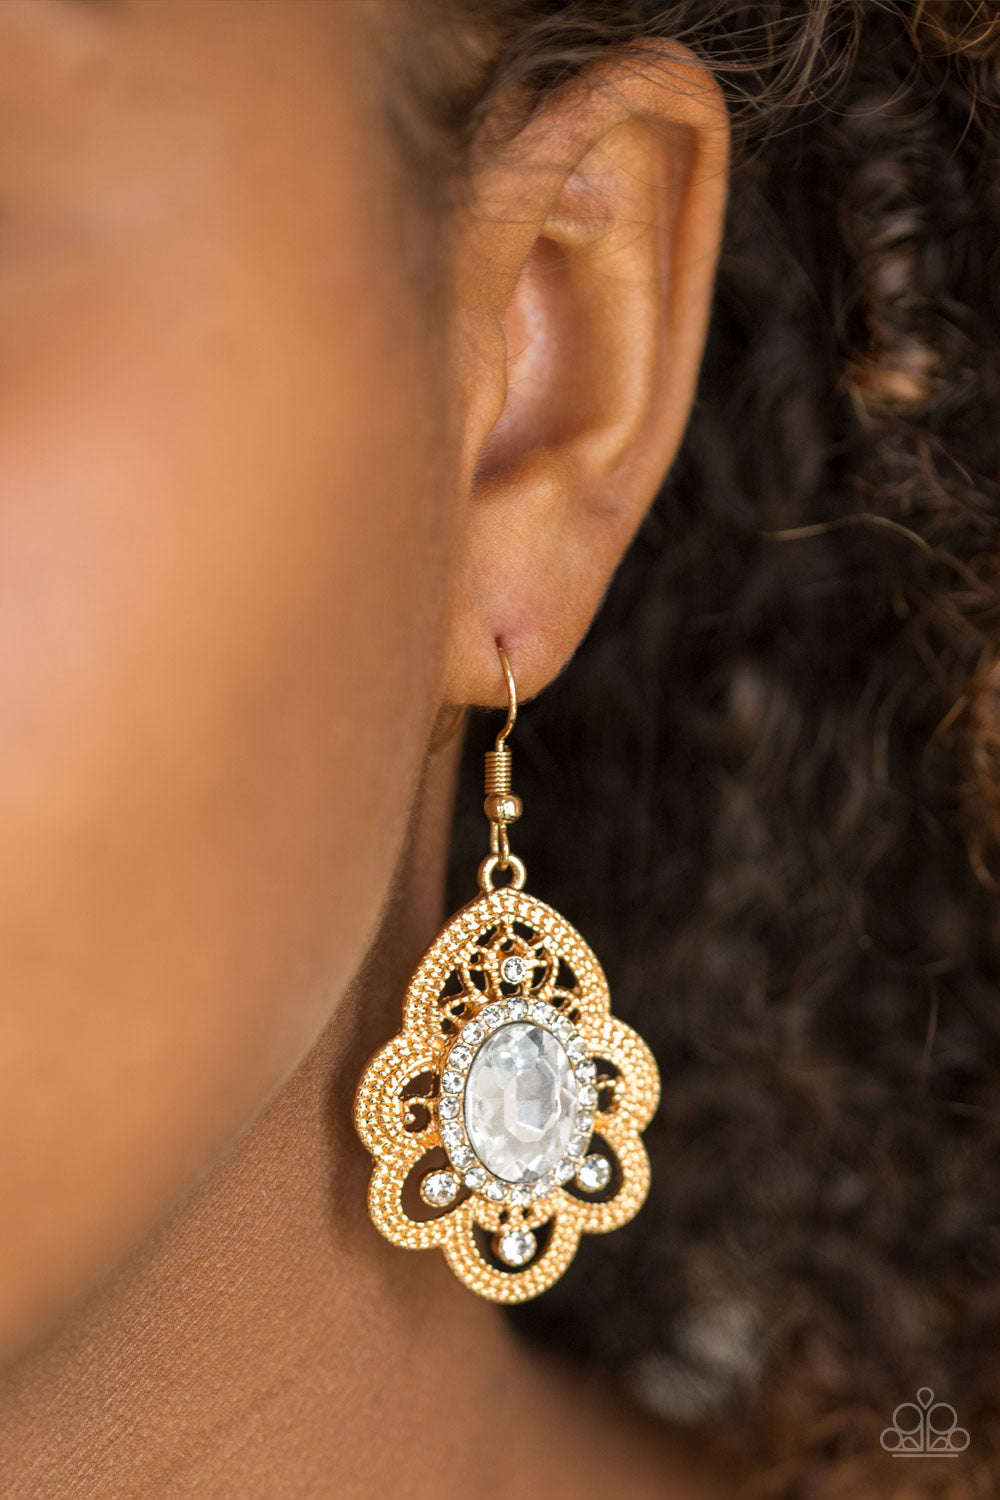 Reign Supreme - Gold - Earrings